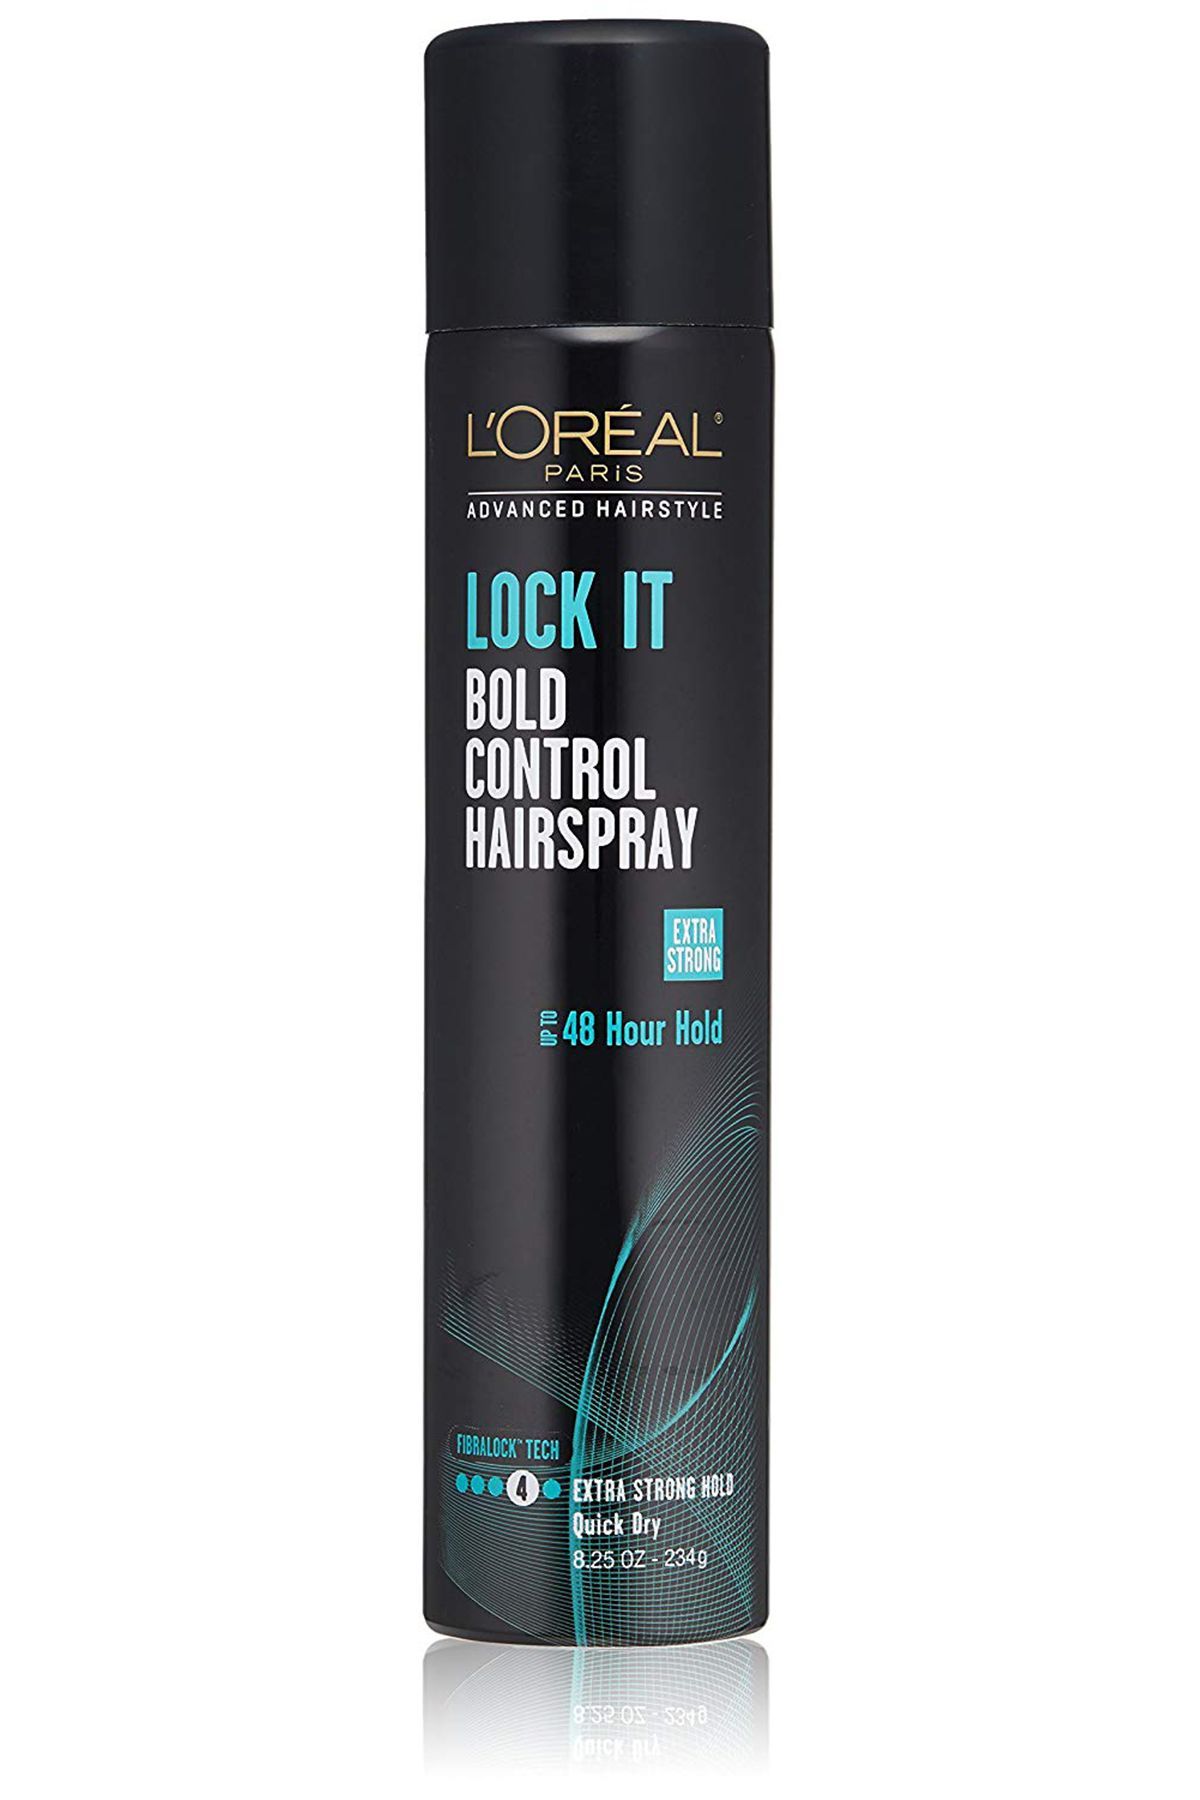 L'Oreal Paris Advanced Hairstyle Lock It Bold Control Hairspray 8.25 Ounce